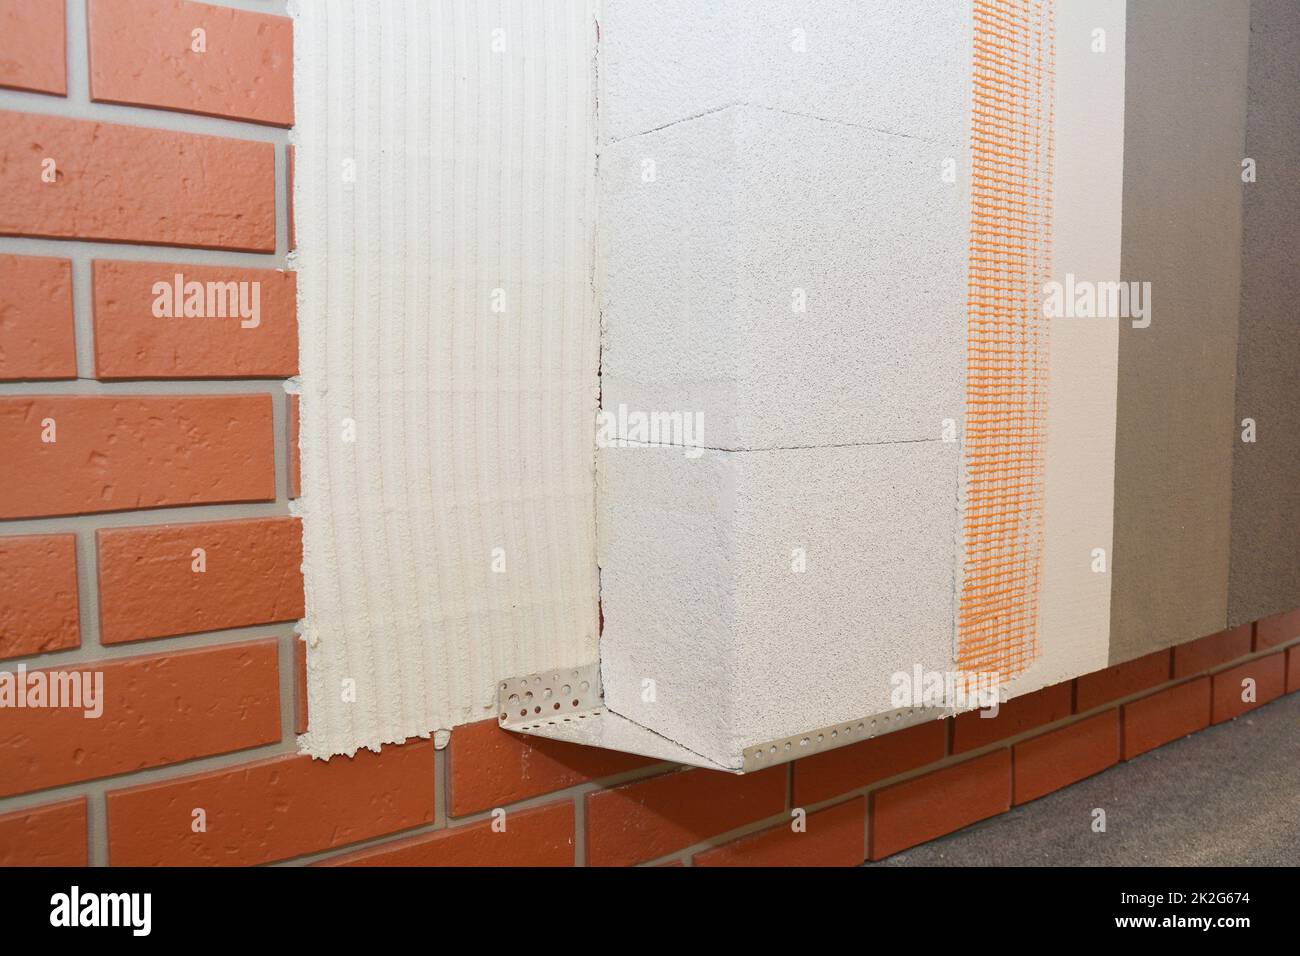 House brick wall renovation, insualtion with glue plastering layers,  reinforcment mesh, aerated concrete blocks, finishing render, stucco. External w Stock Photo